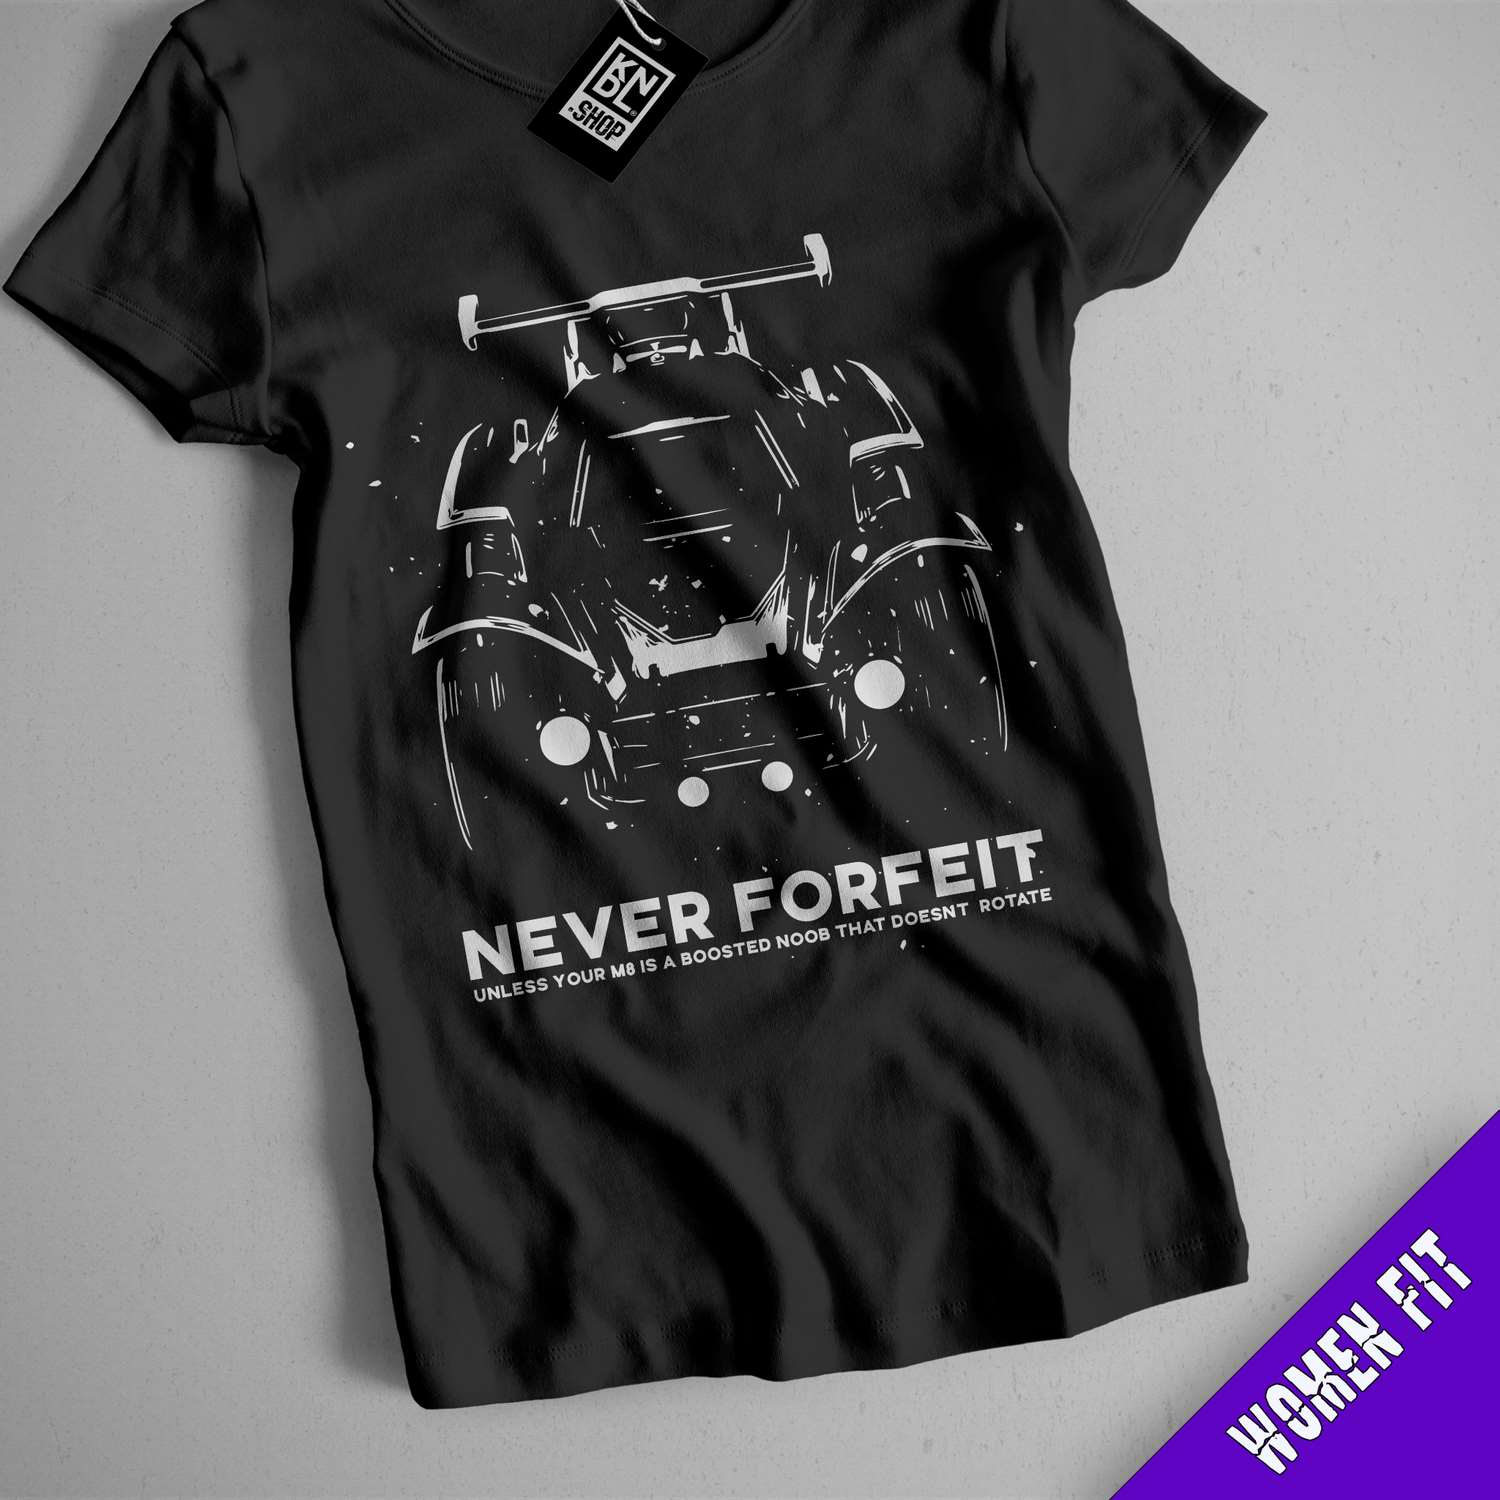 a black shirt with a picture of a car on it